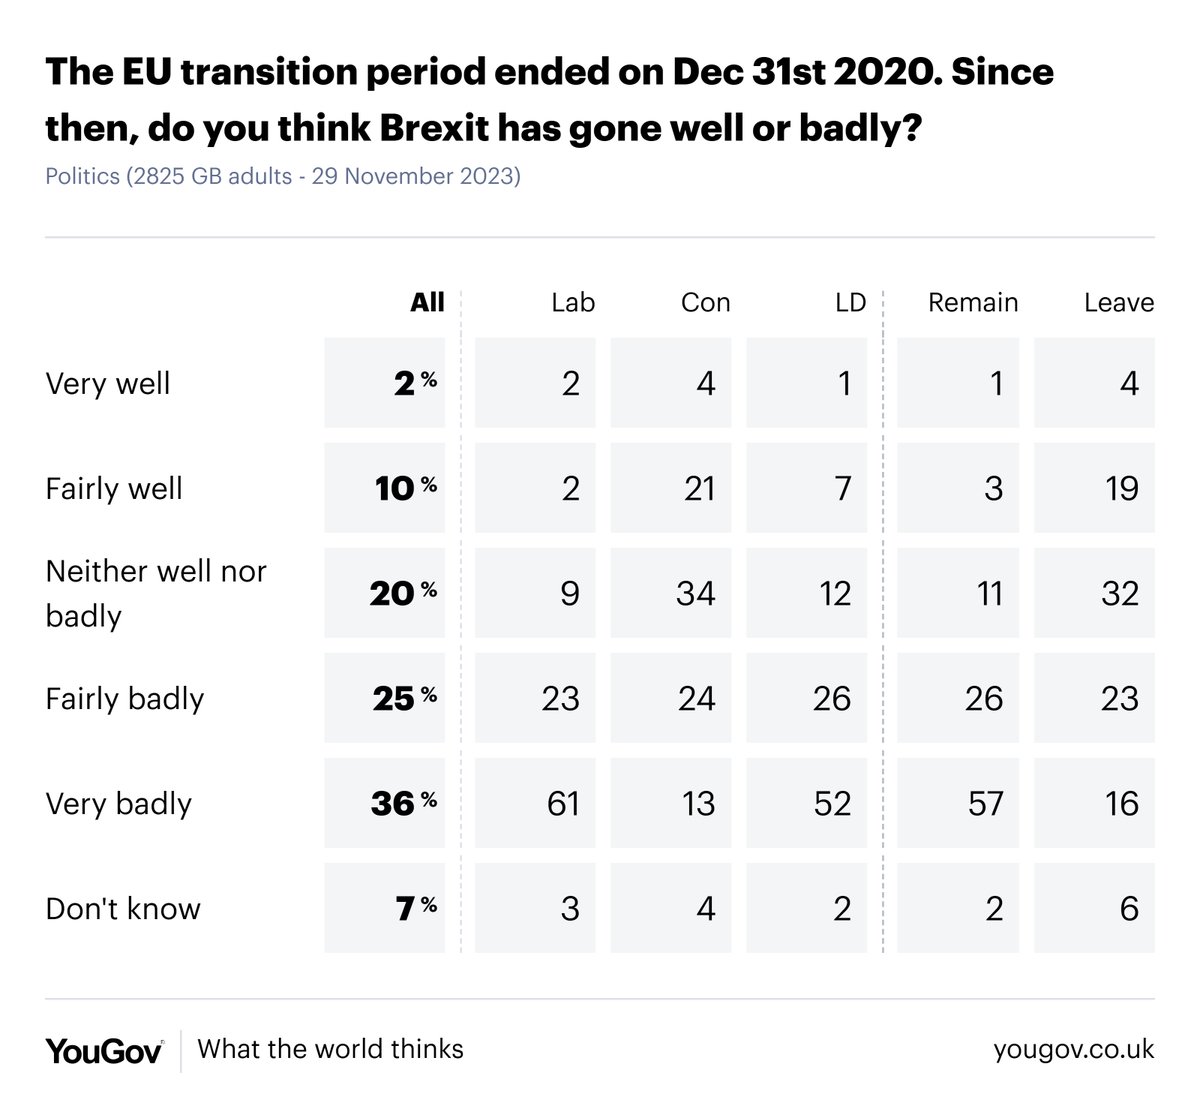 The EU transition period ended on Dec 31st 2020. Since then, do you think Brexit has gone well or badly? Well: 12% Neither well nor badly: 20% Badly: 61% yougov.co.uk/topics/politic…